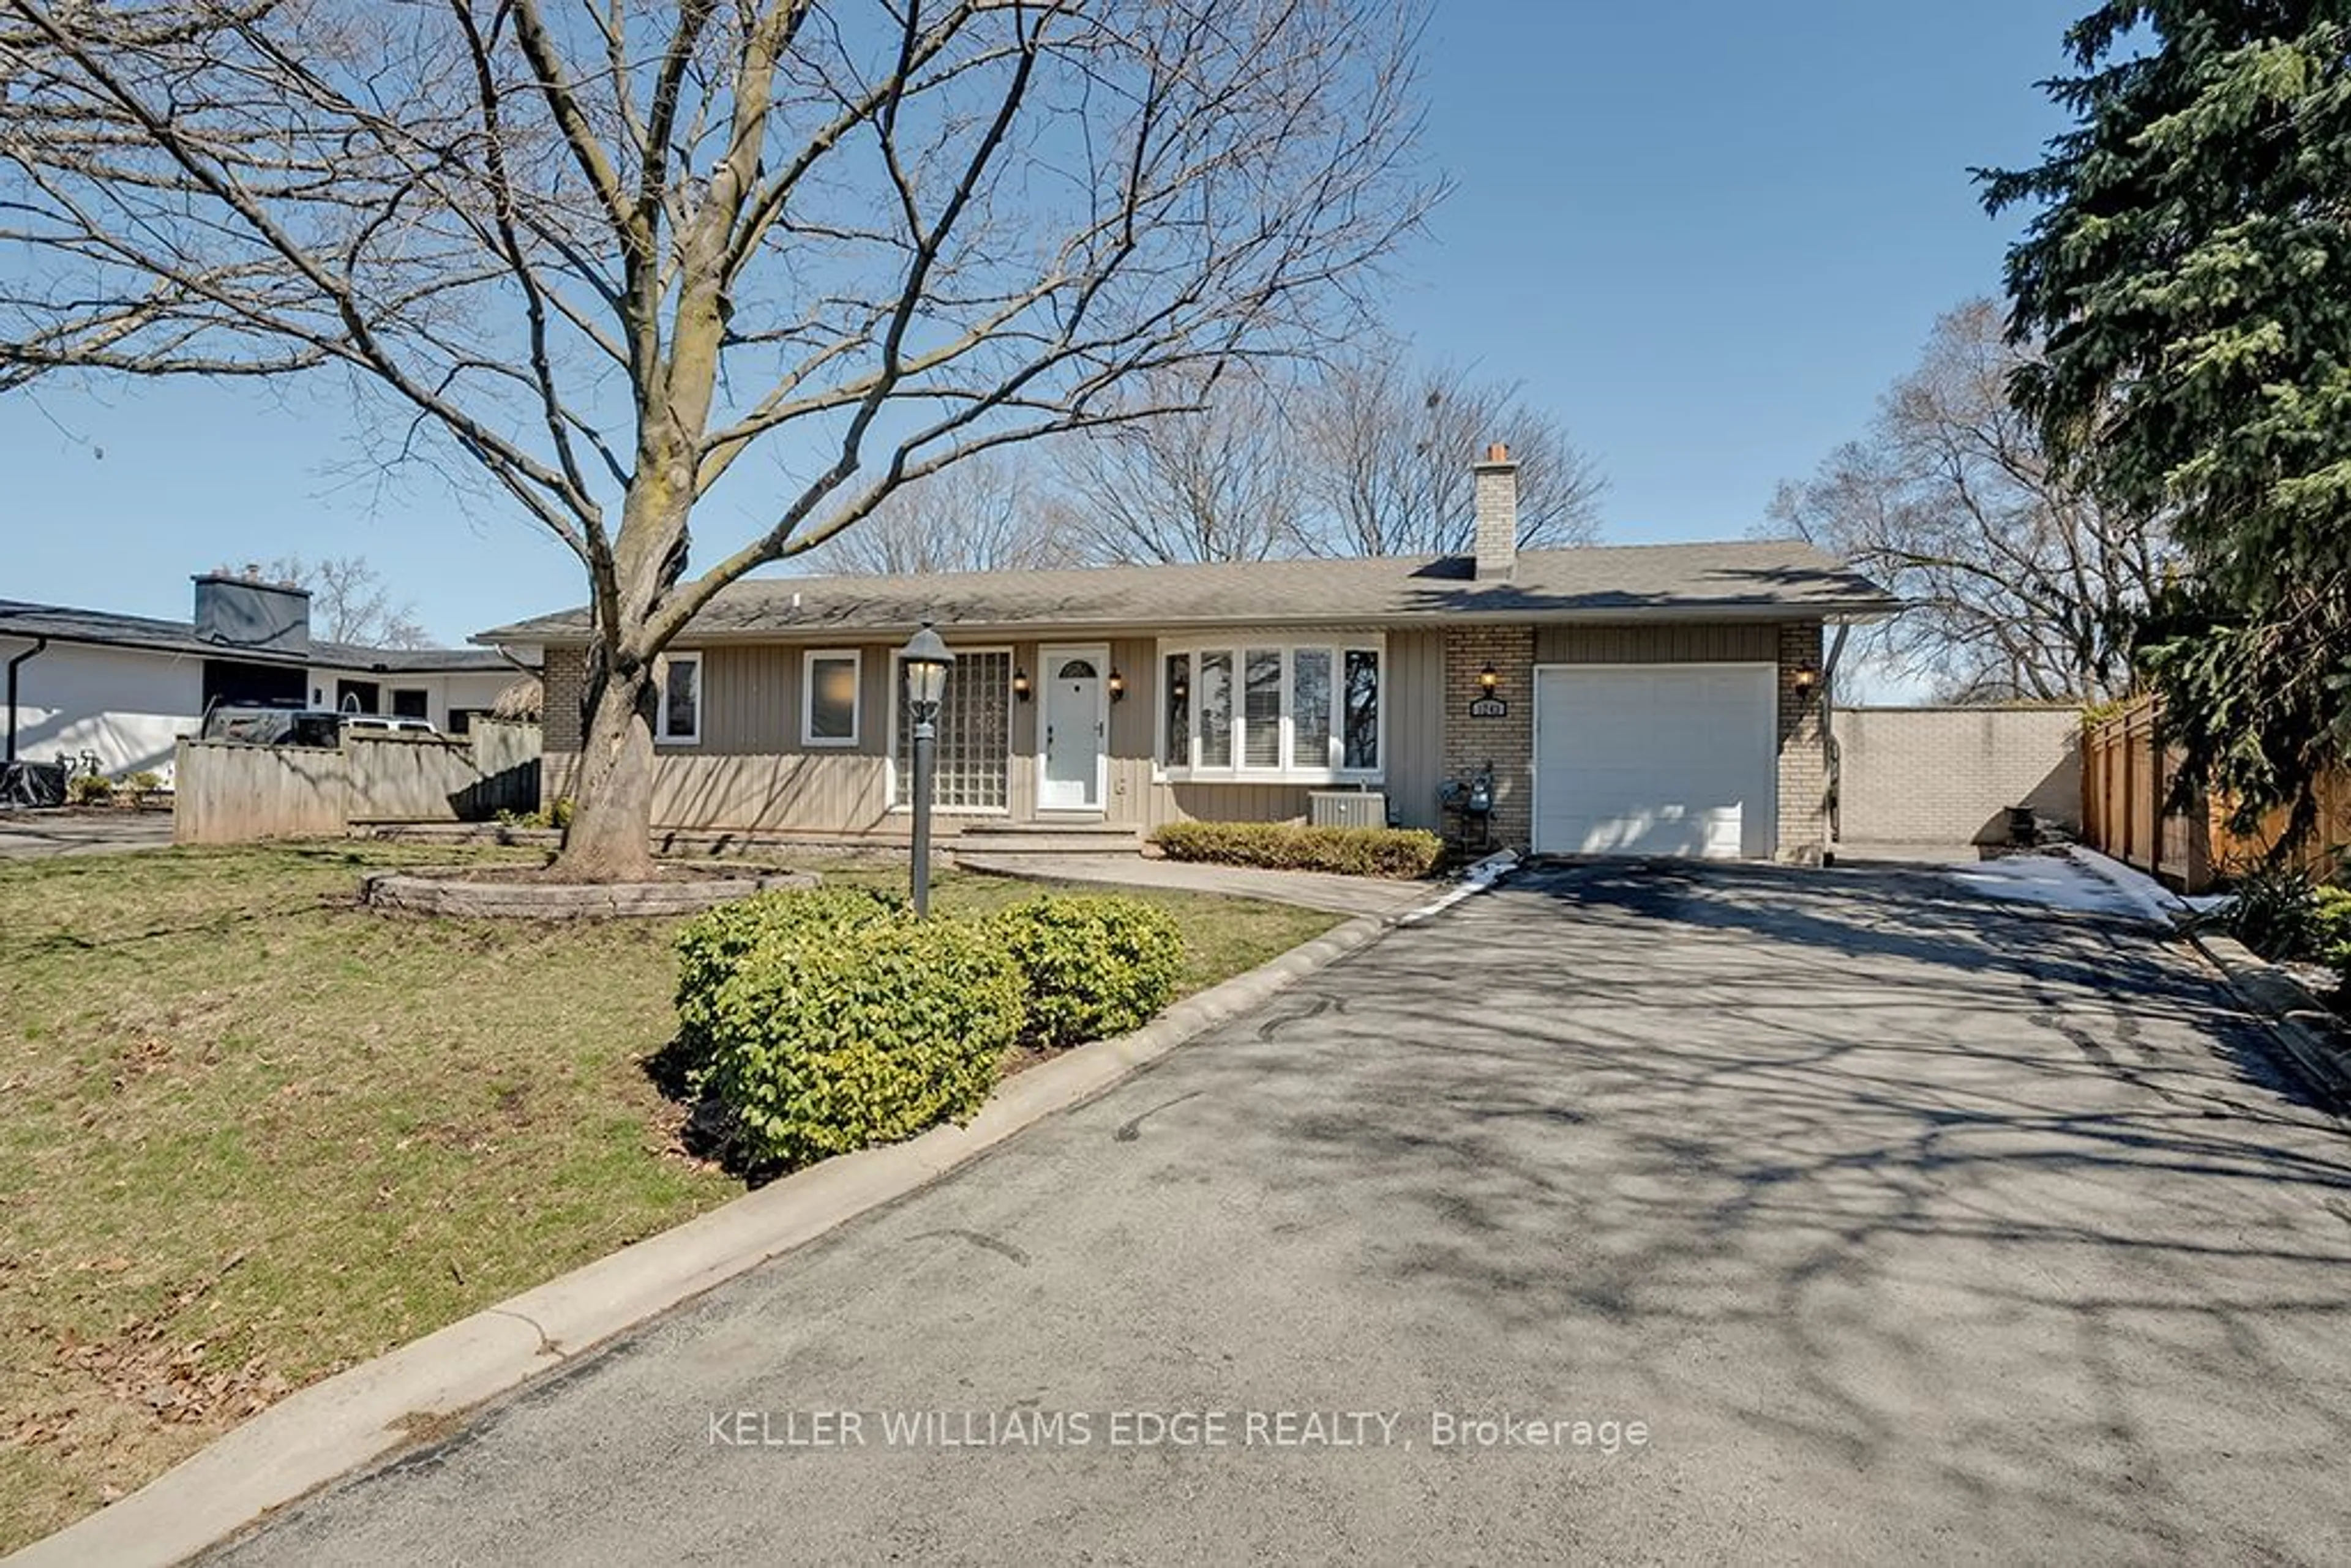 Home with unknown exterior material for 1243 Kingsmead Cres, Oakville Ontario L6H 2K5